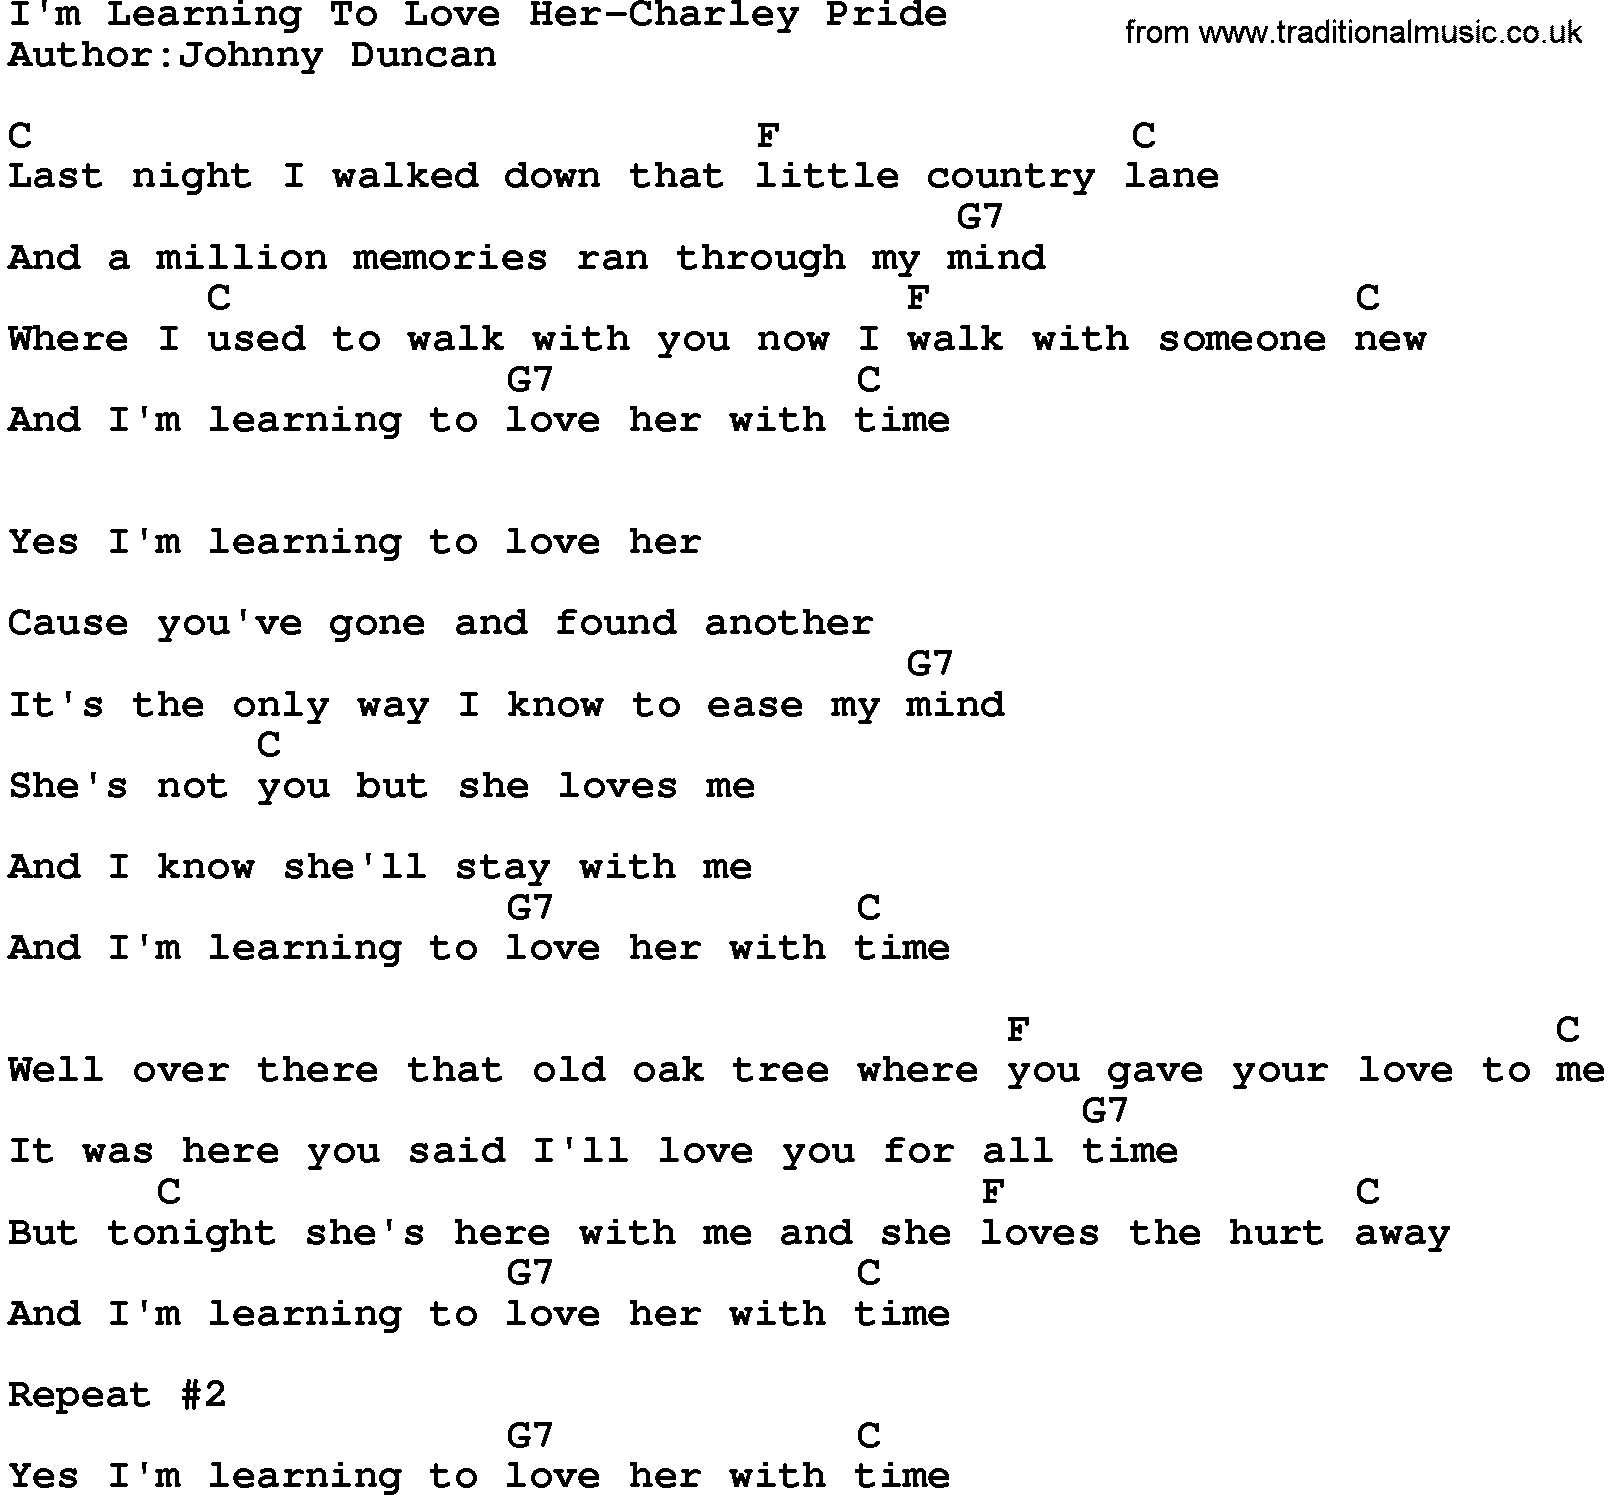 Country music song: I'm Learning To Love Her-Charley Pride lyrics and chords